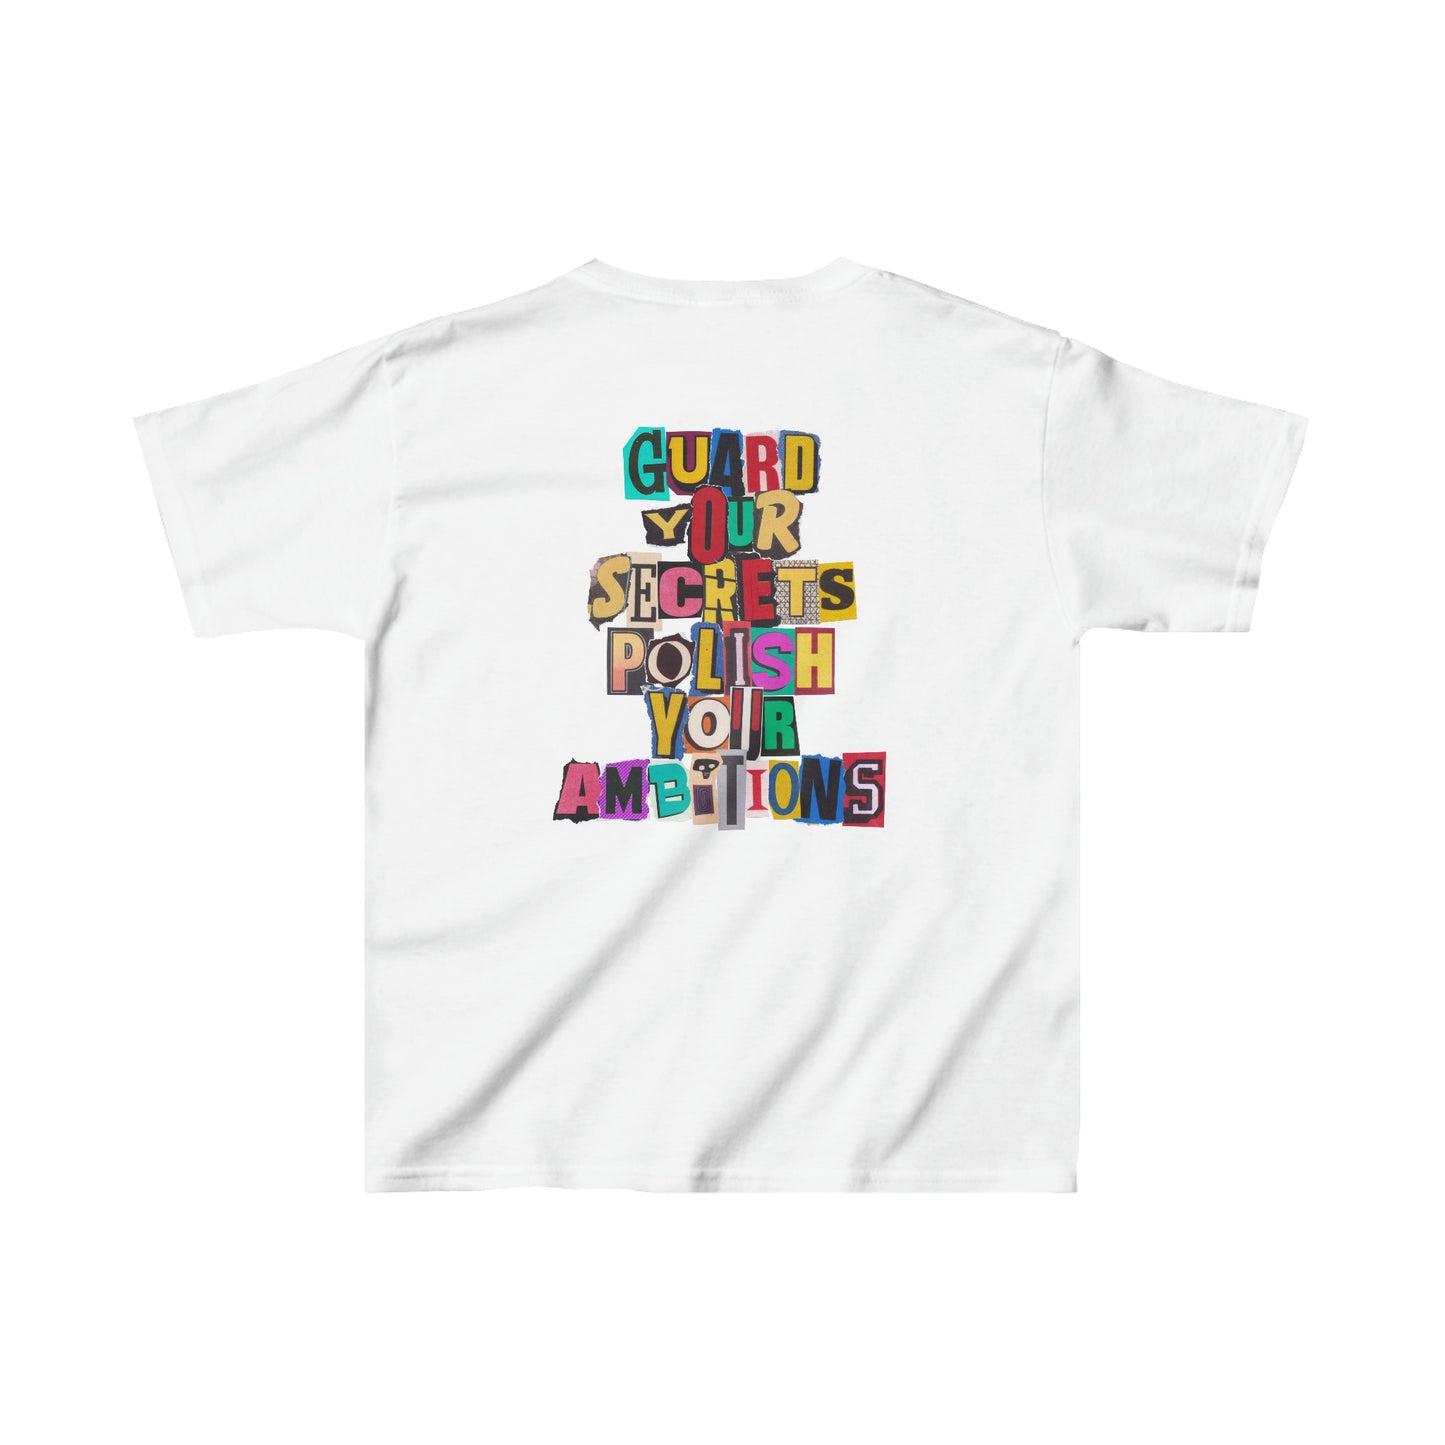 Youth WIY x McLaurin Vintage T-Shirt